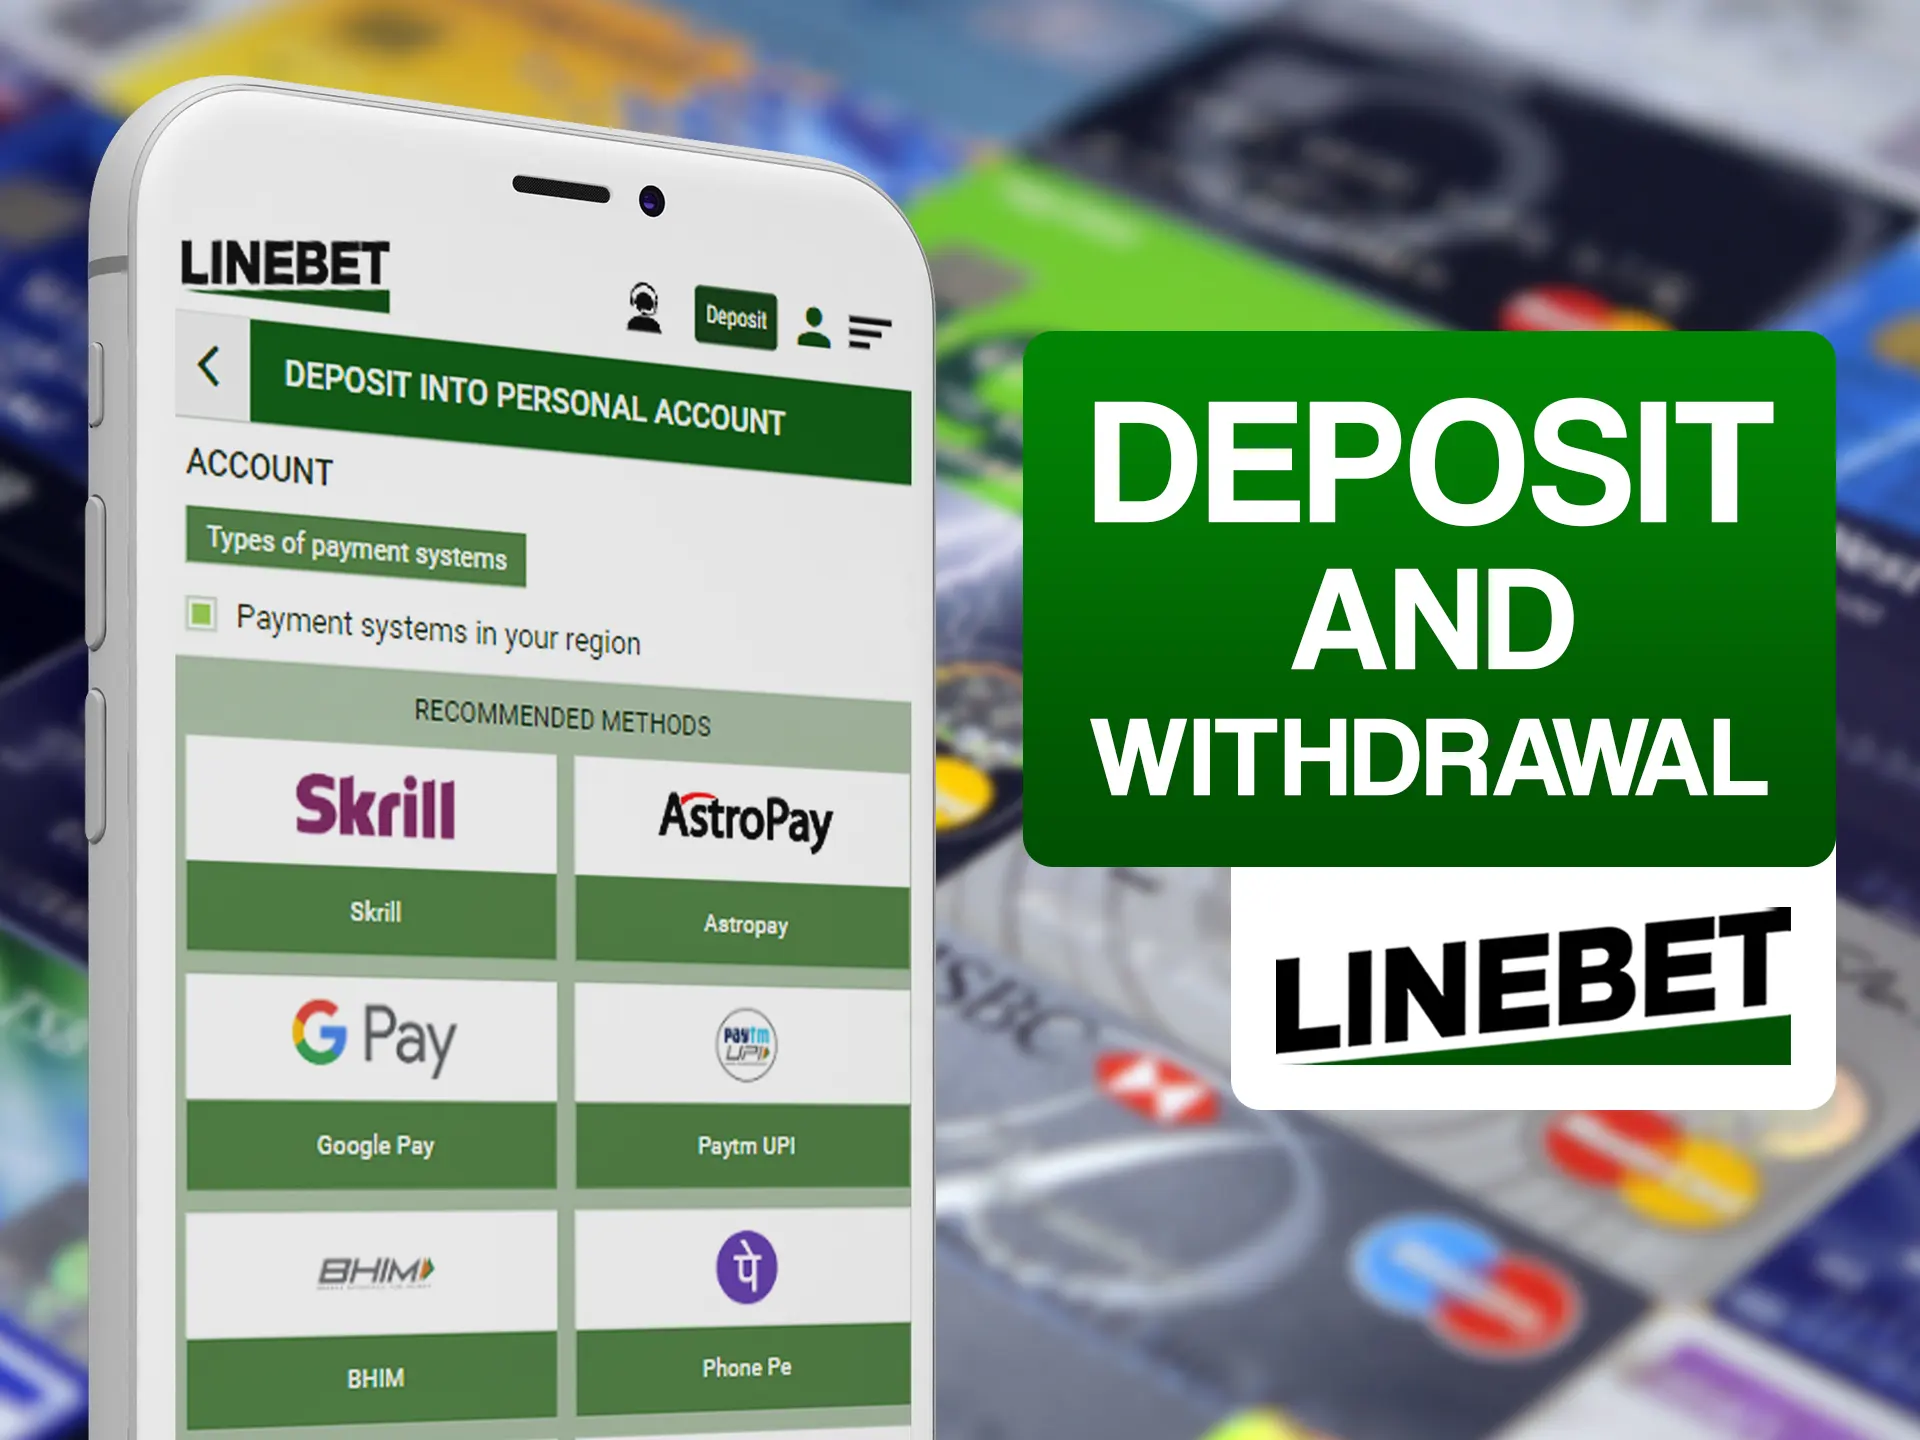 Withdraw and deposit without problems in Linebet app.